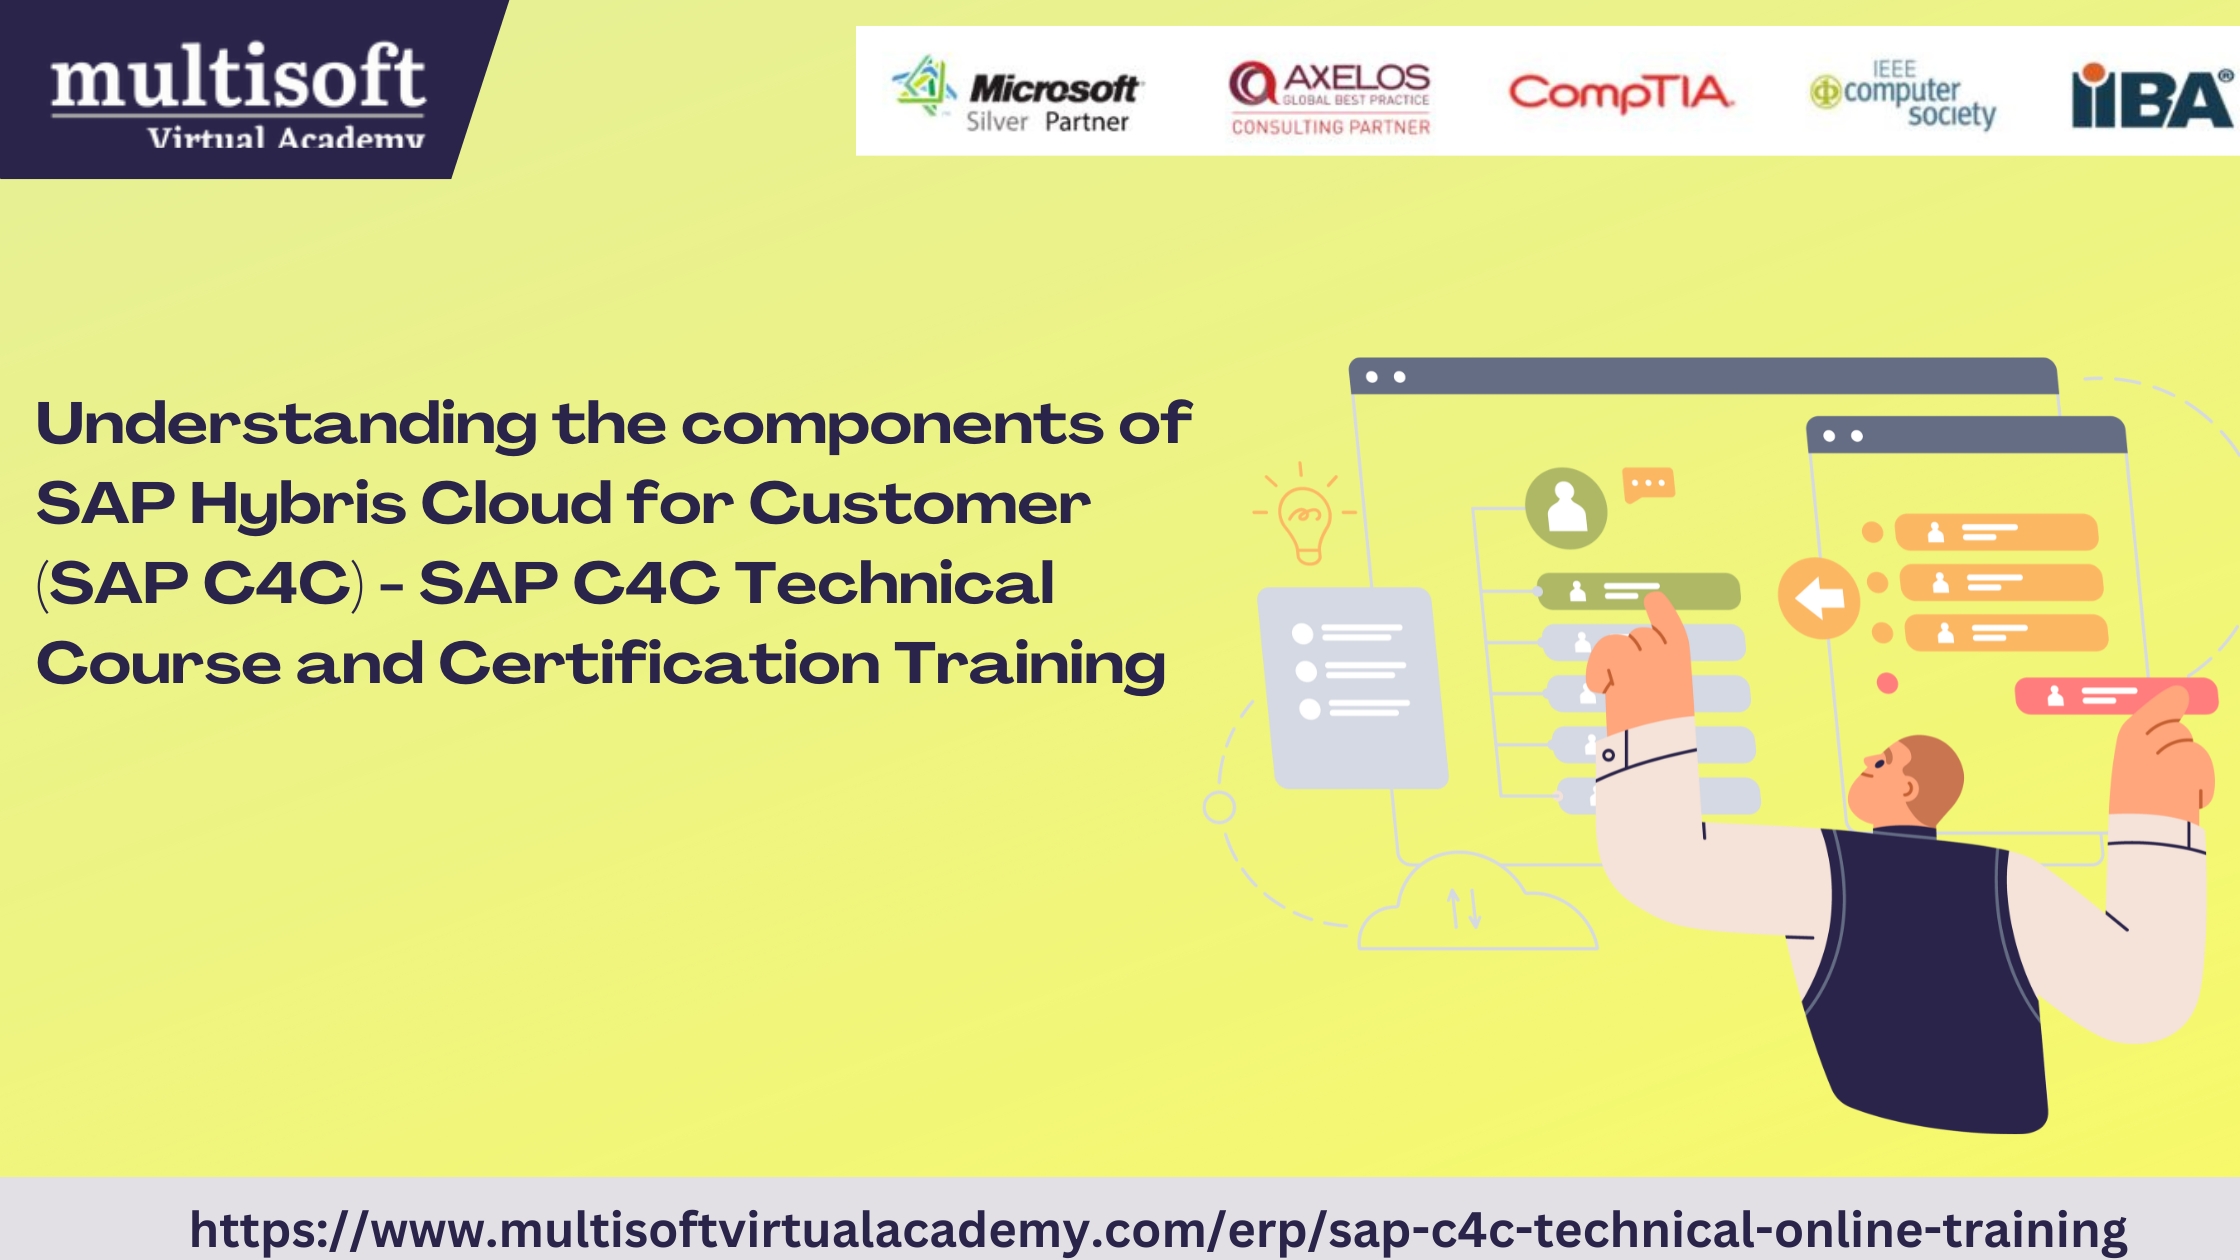 Understanding the components of SAP Hybris Cloud for Customer (SAP C4C) - SAP C4C Technical Course and Certification Training